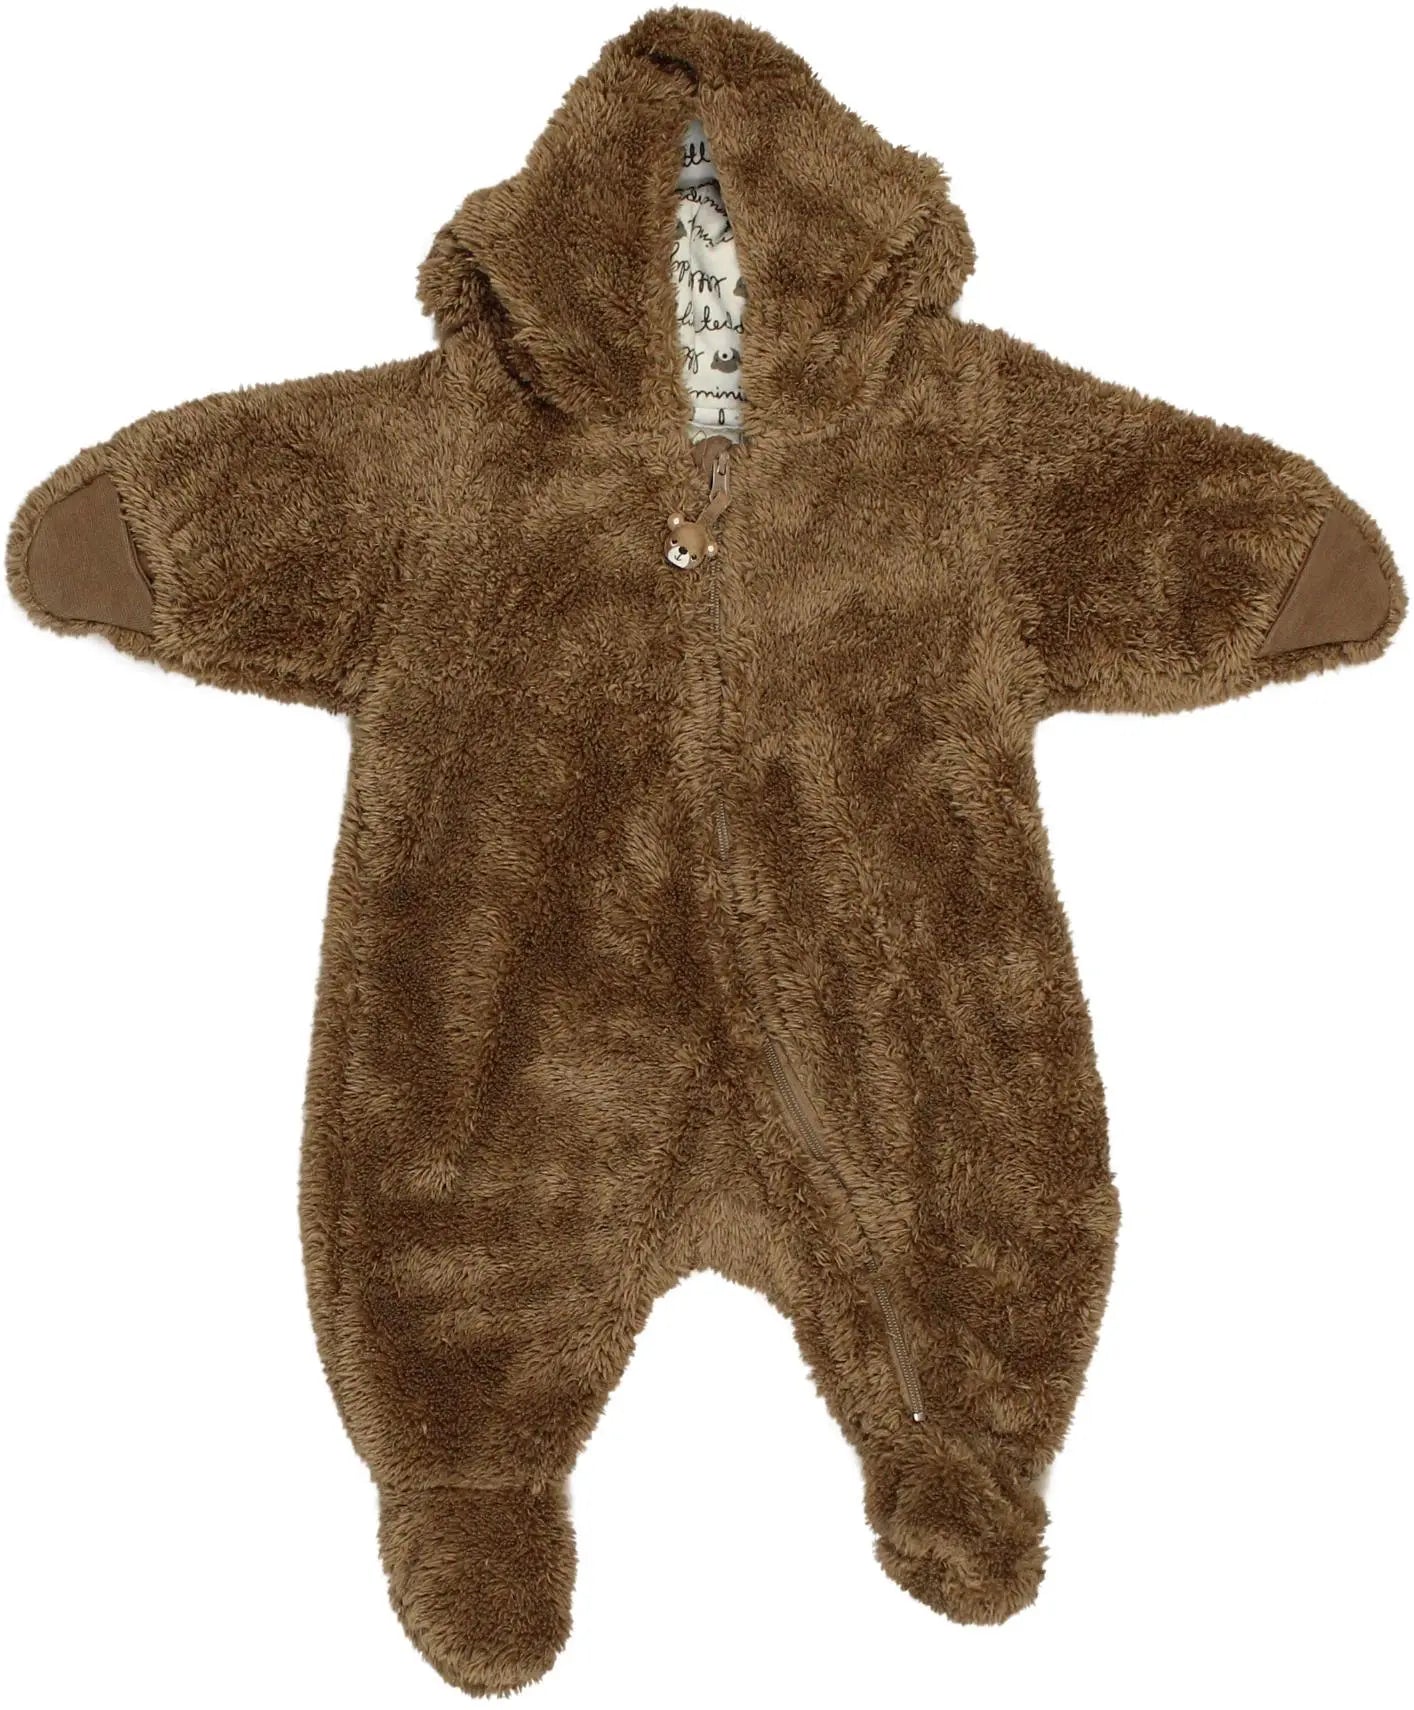 H&M - Teddy Suit- ThriftTale.com - Vintage and second handclothing